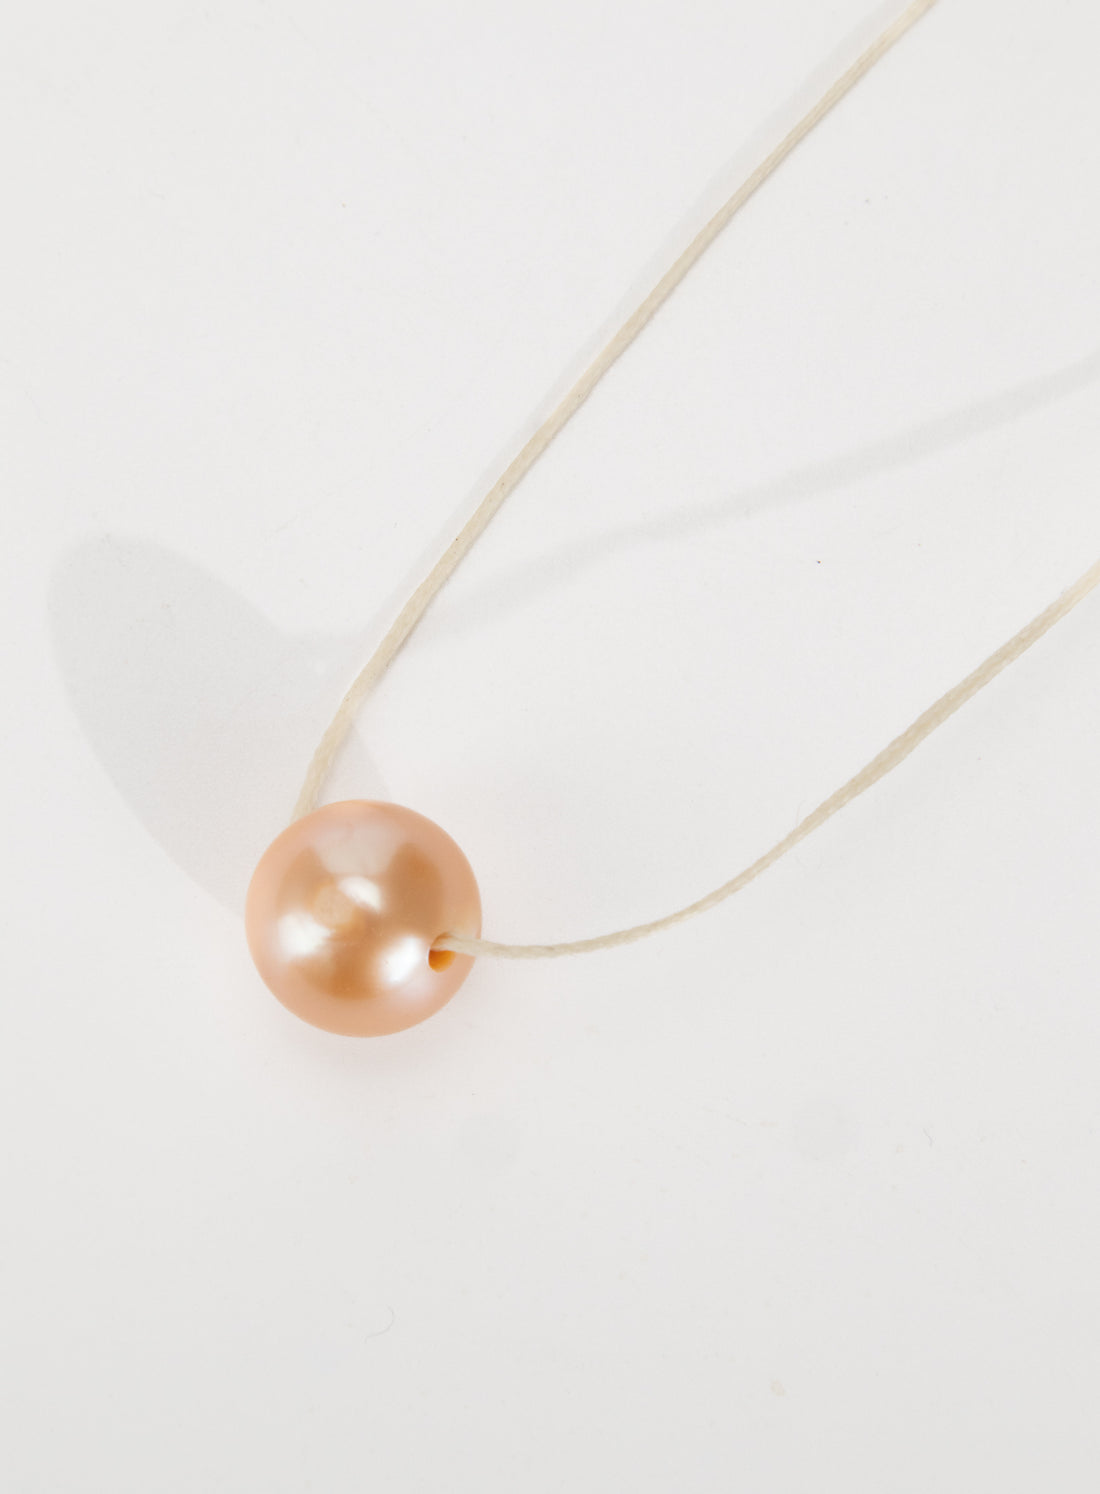 For Mum, you are a real pearl - Peach Necklace